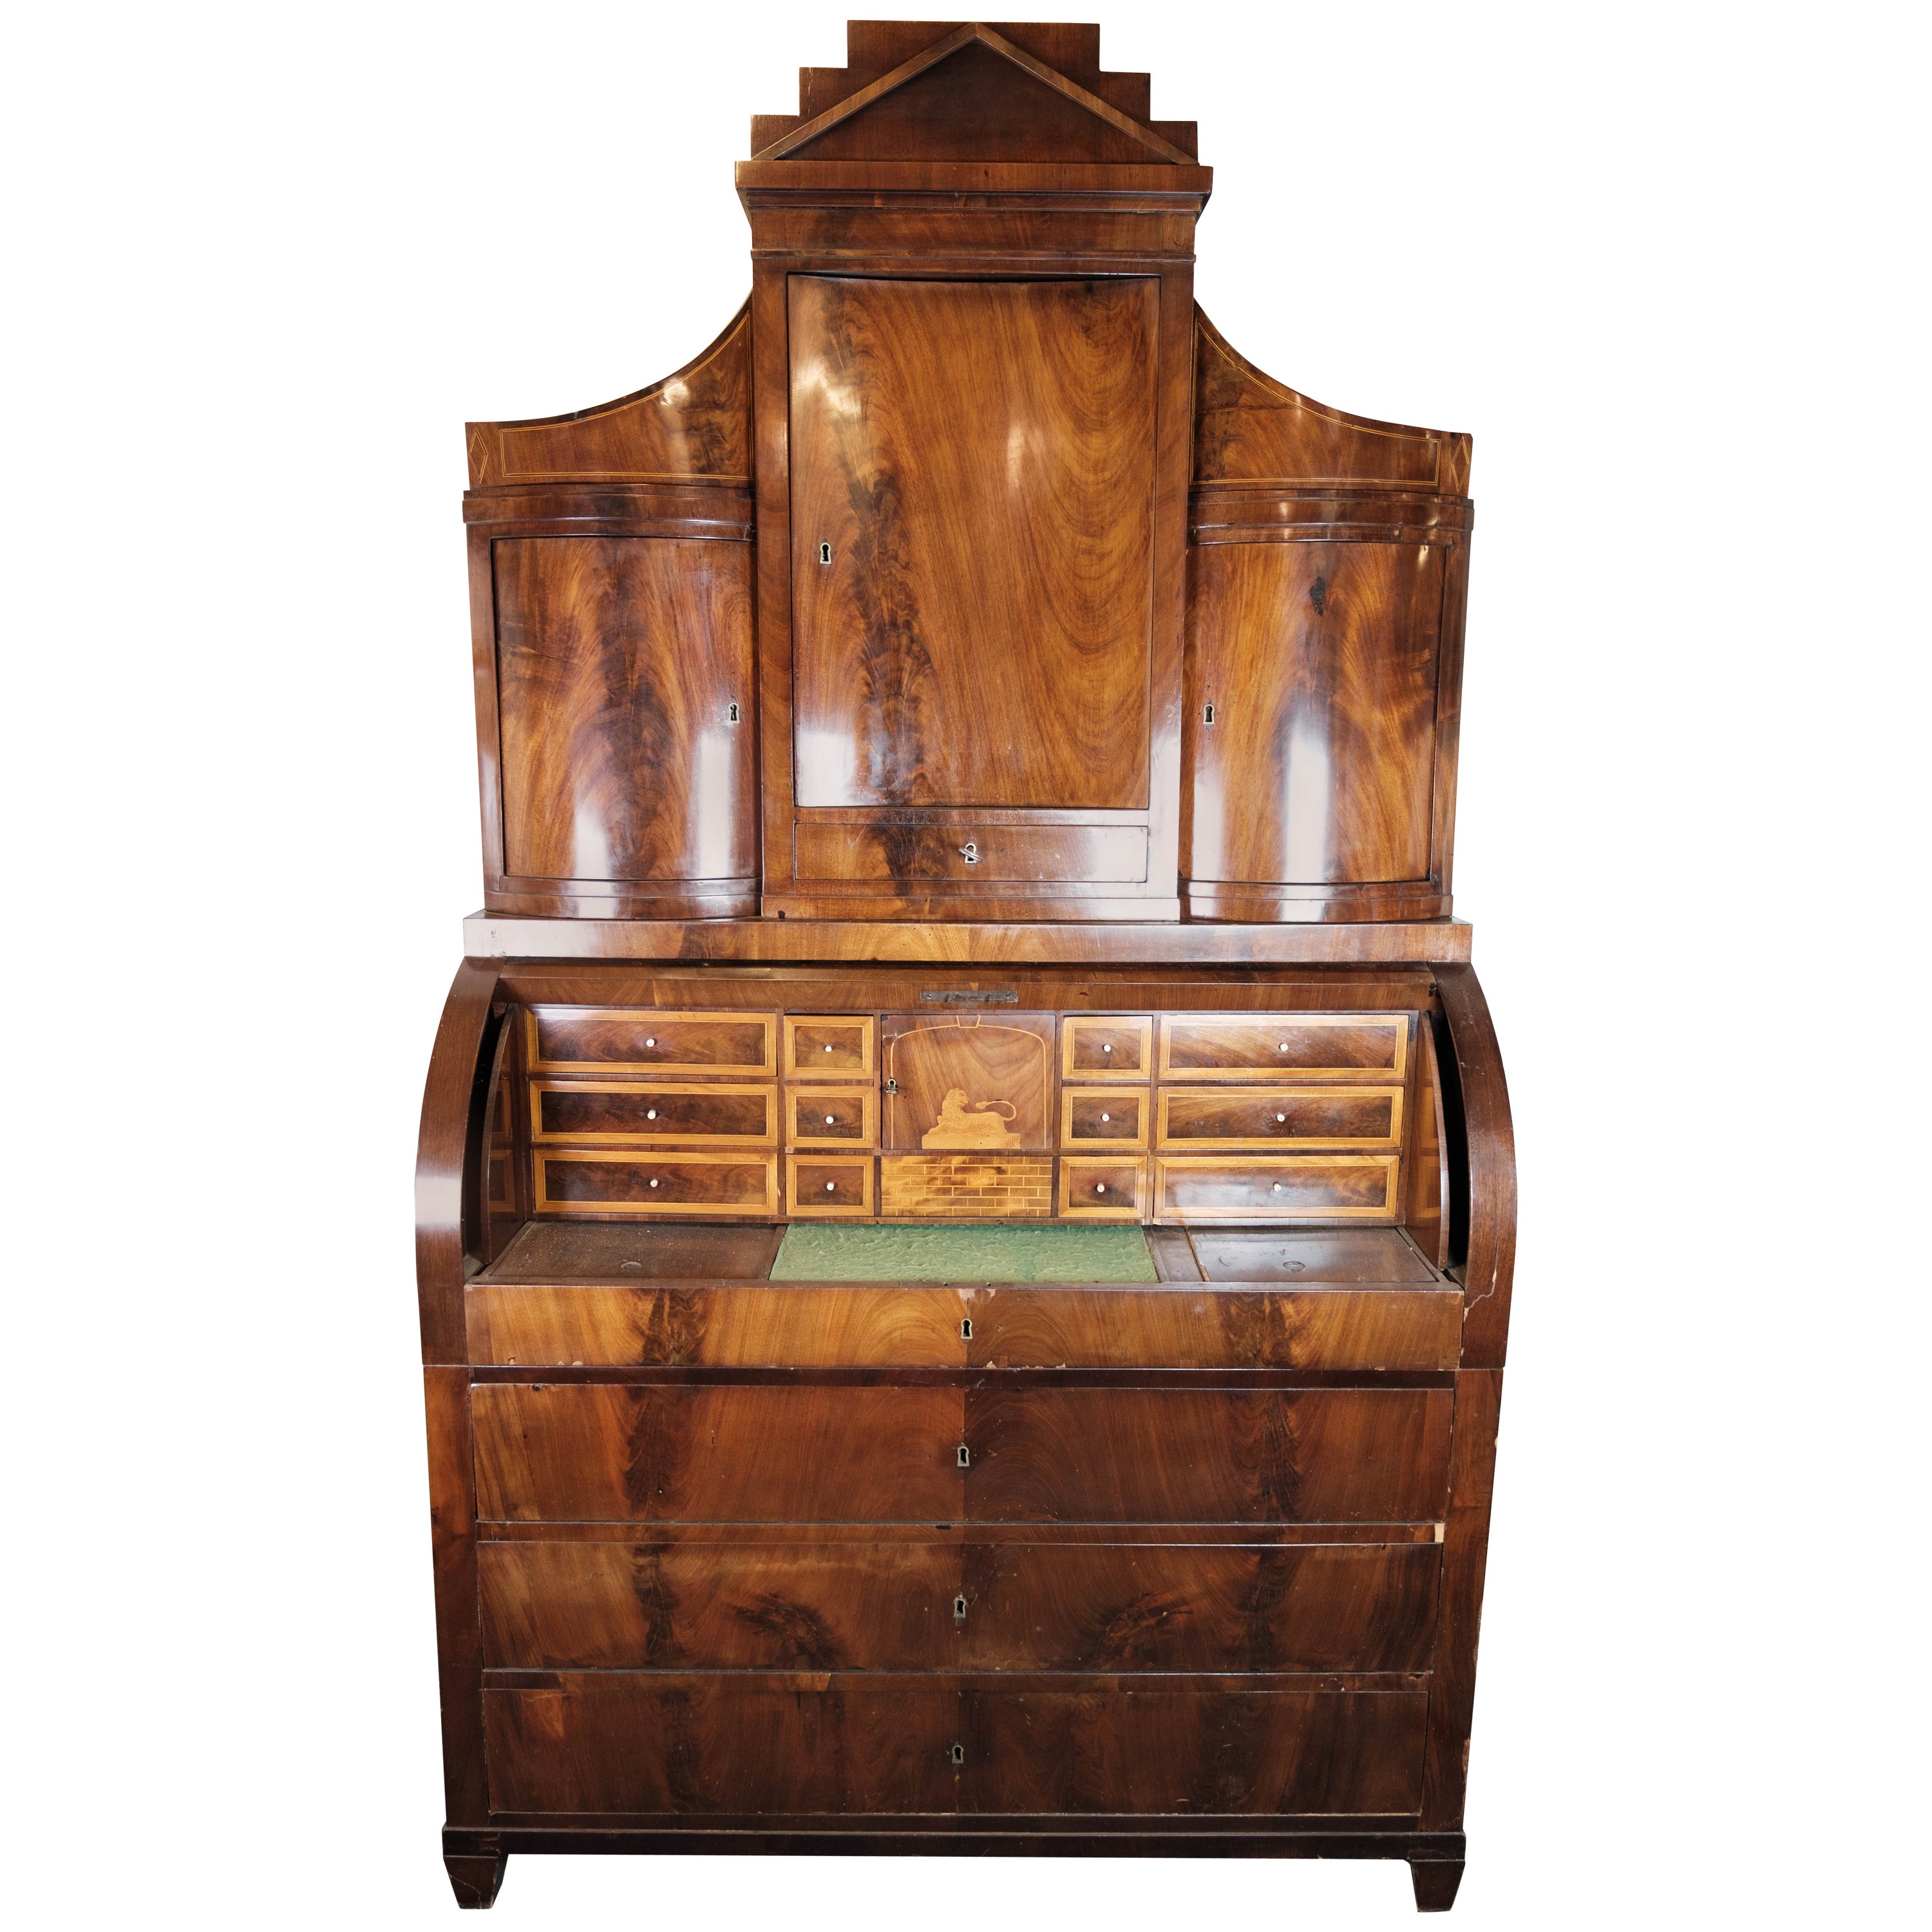 Large Empire Bureau of Hand Polished Mahogany with Inlaid Wood, 1820s For Sale